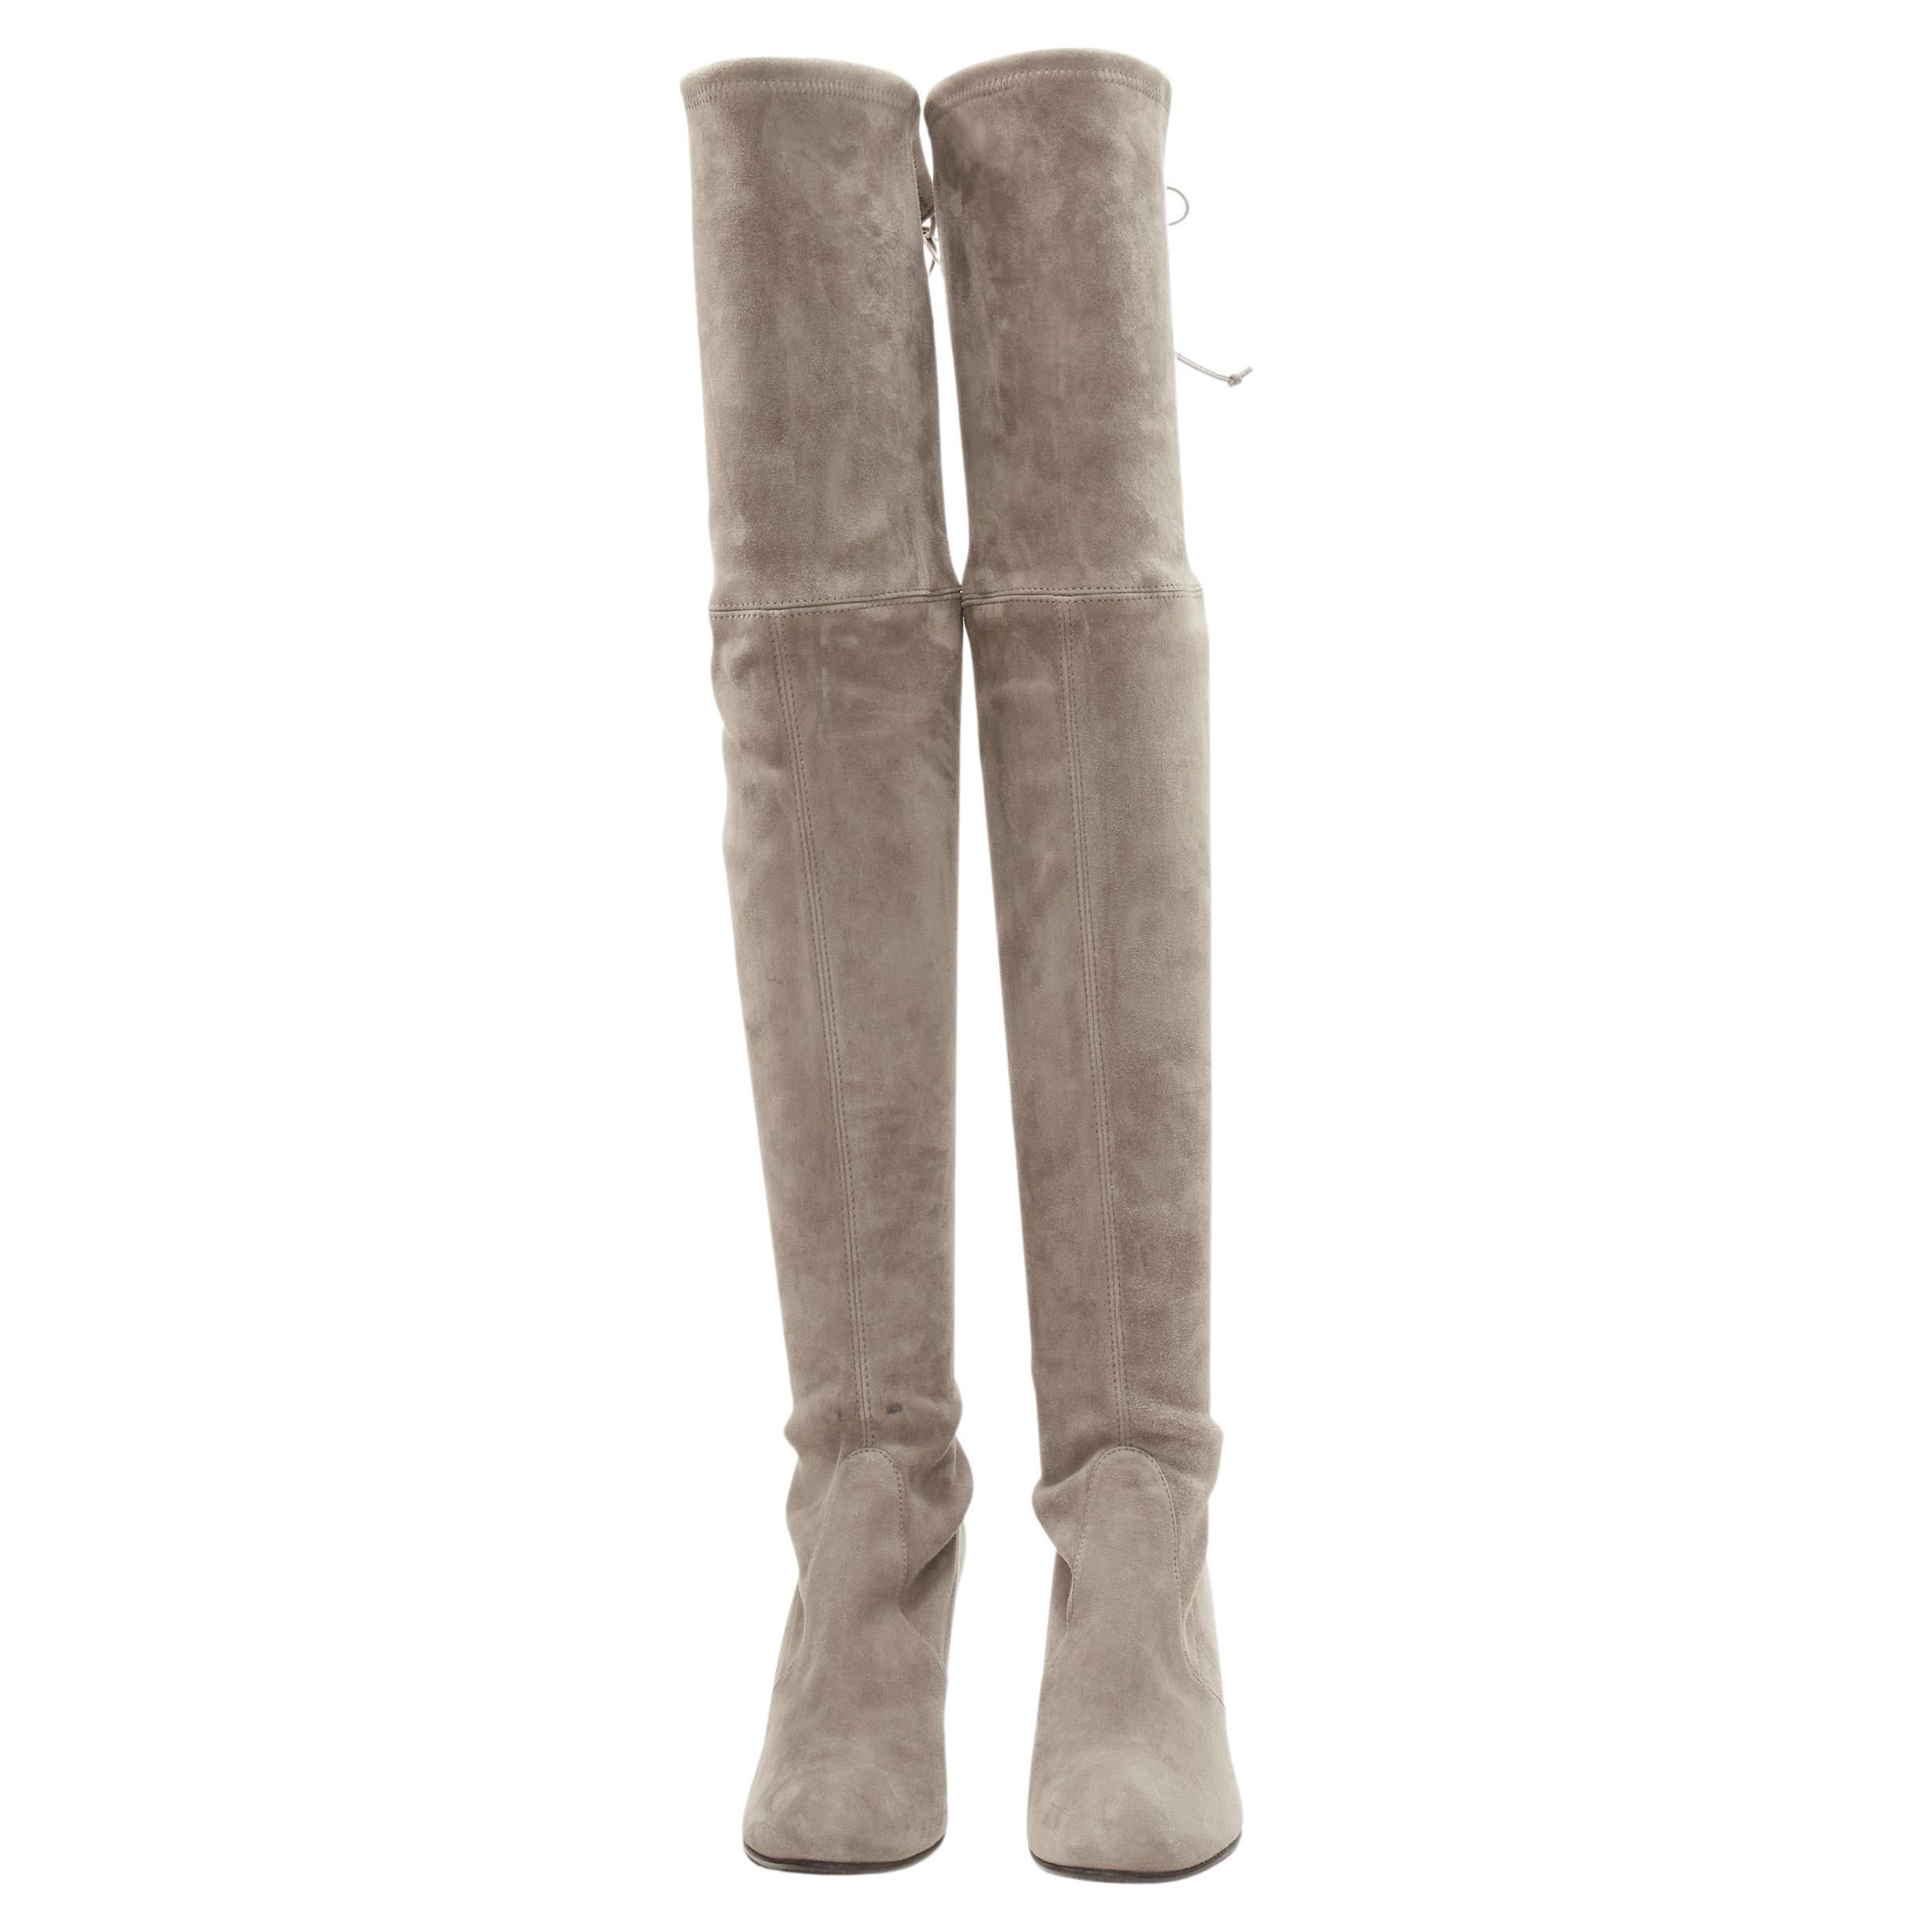 STUART WEITZMAN Highland grey topo suede leather over knee boots EU38.5
Brand: Stuart Weitzman
Material: Suede
Color: Grey
Pattern: Solid
Closure: Pull On
Extra Detail: Pull on over knee boots. Self tie leather string at top. Almond round toe.